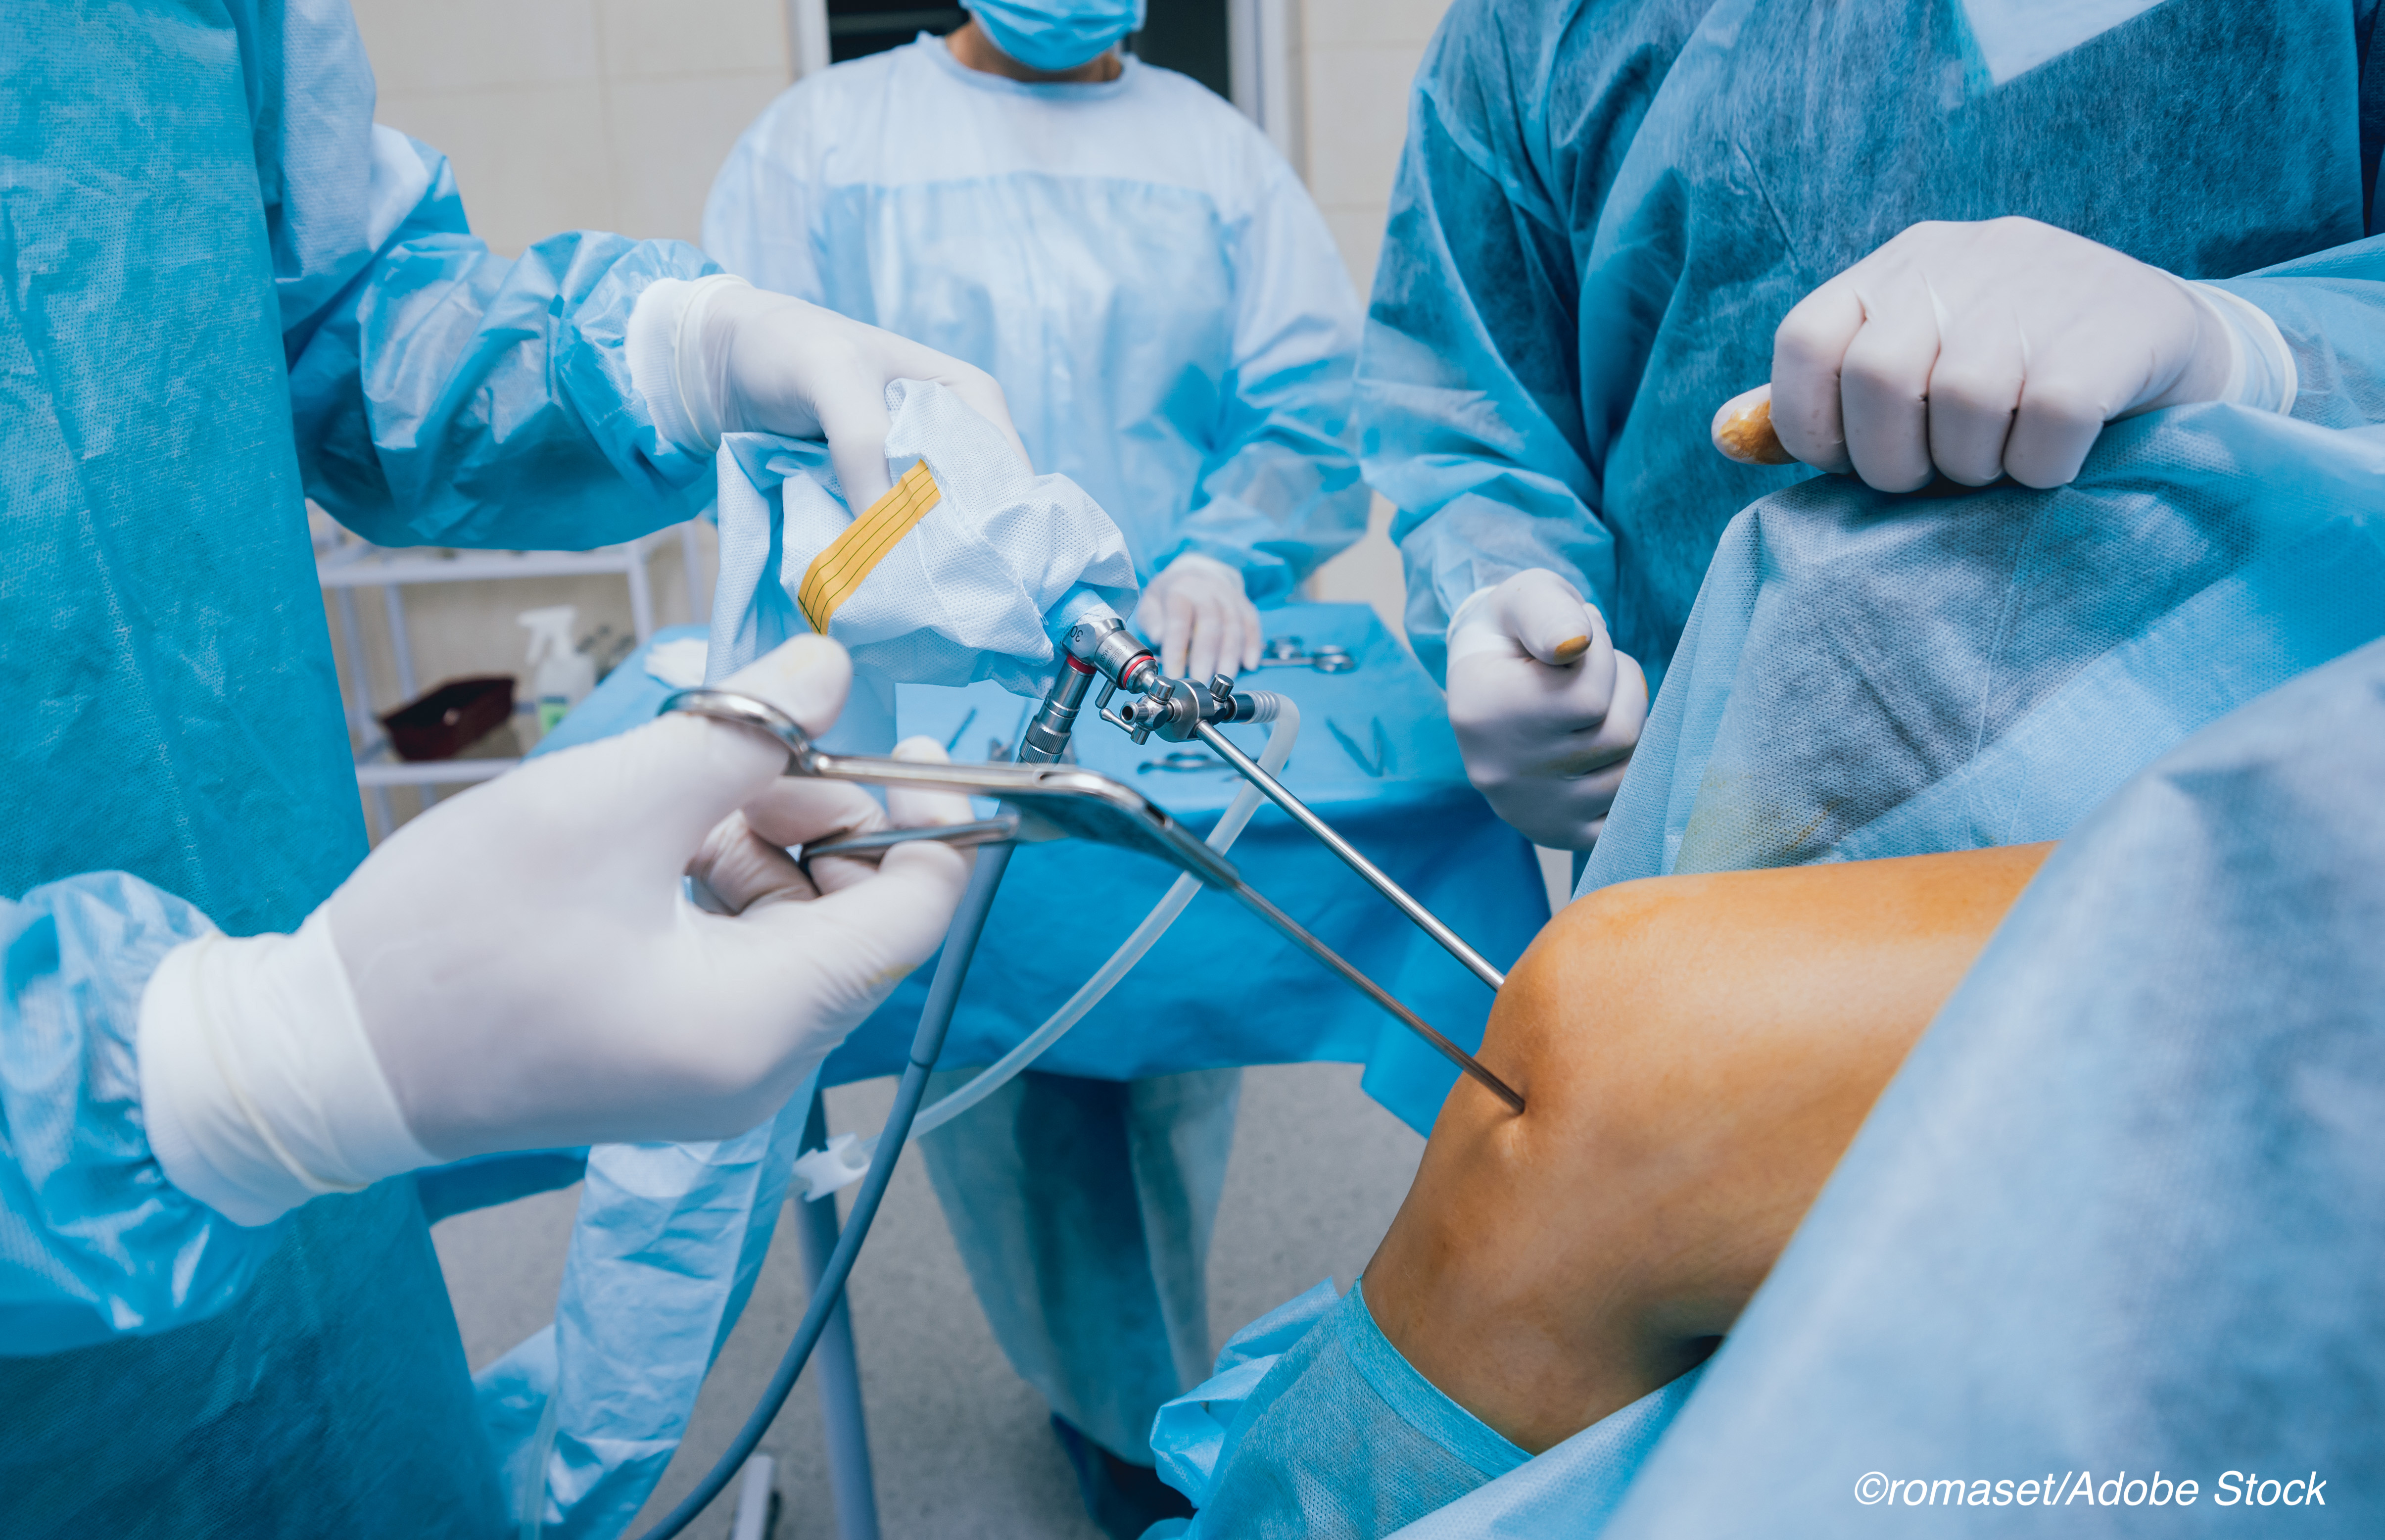 A Dearth of Evidence Supports Elective Orthopedic Surgeries